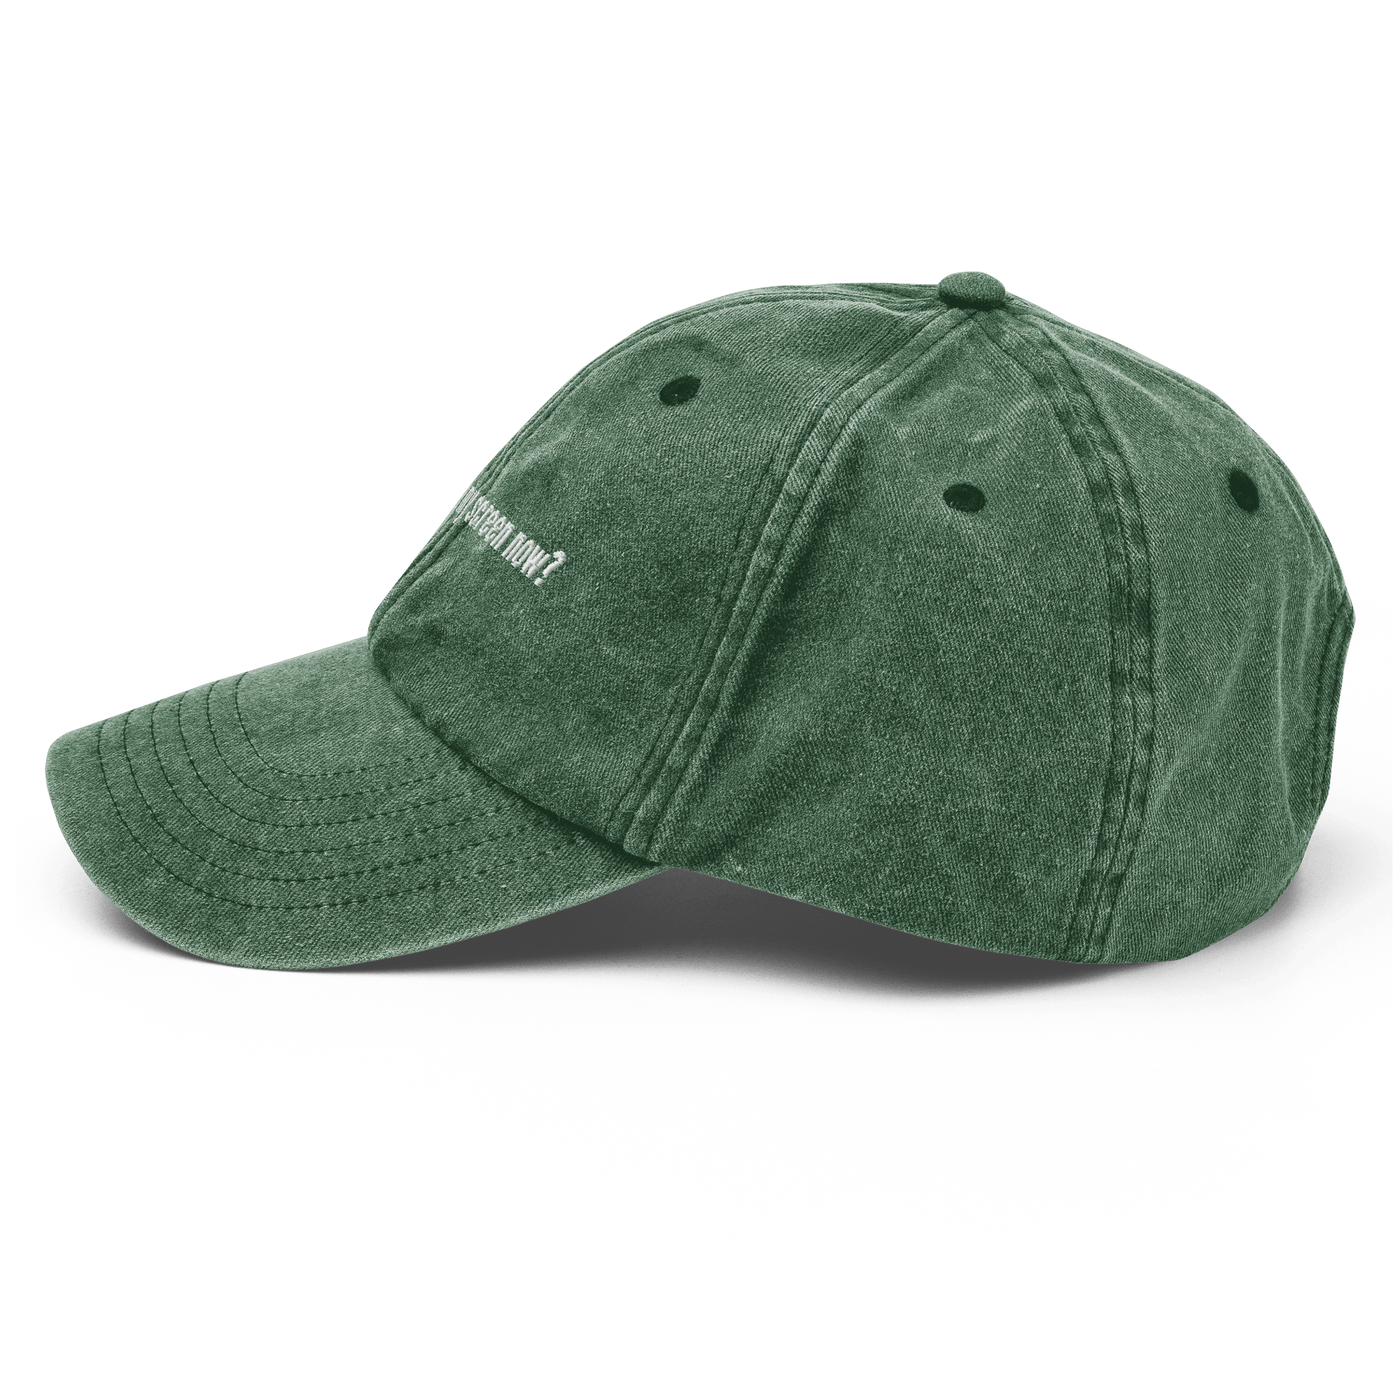 Can you see my screen now? Vintage Hat - Vintage Bottle Green - - Just Another Cap Store